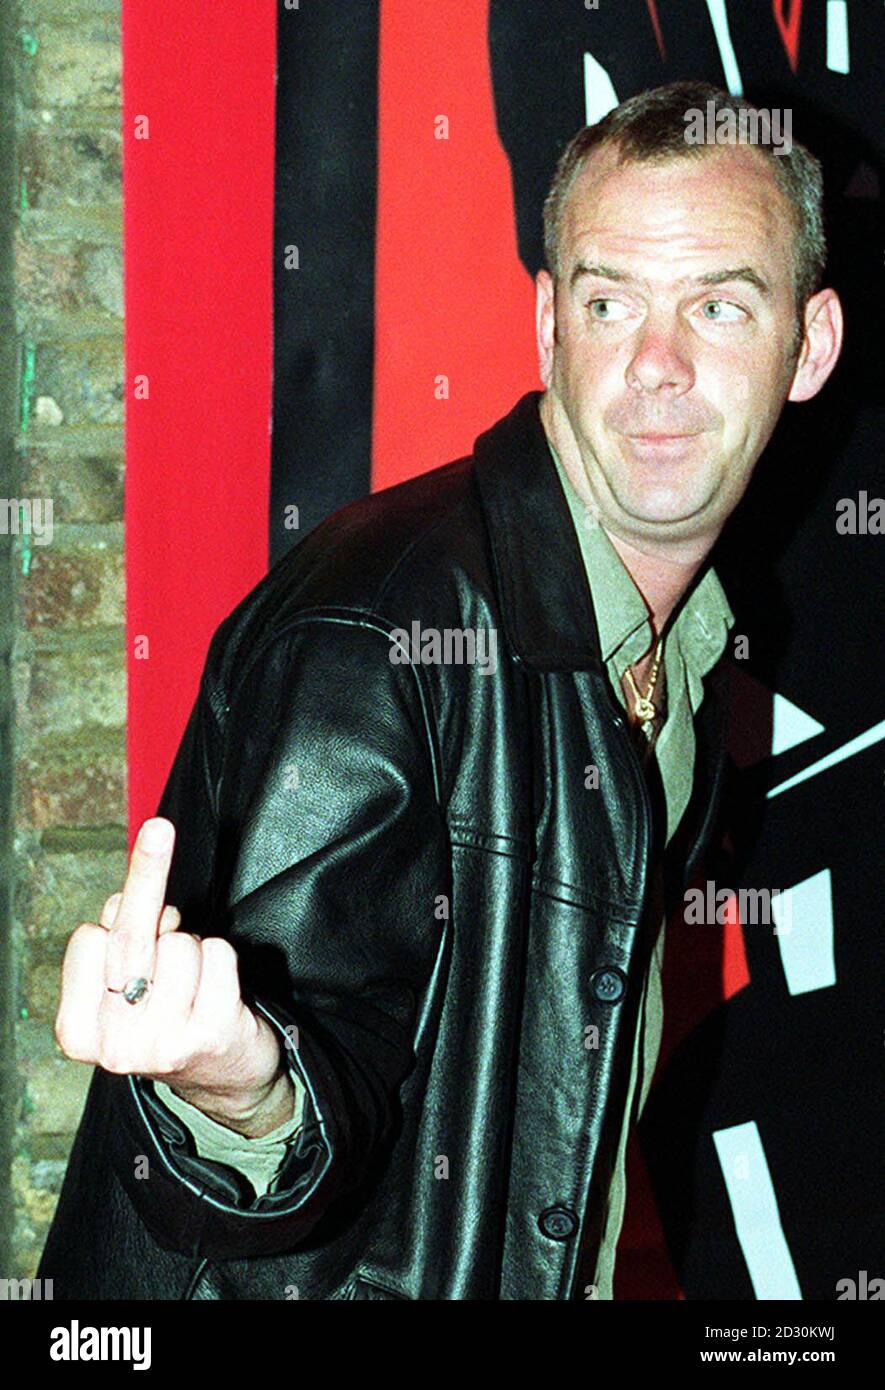 DJ and husband of TV presenter Zoe Ball, Fat Boy Slim AKA Norman Cook, arriving at the NME Awards at the Mermaid Theatre in Central London. Stock Photo